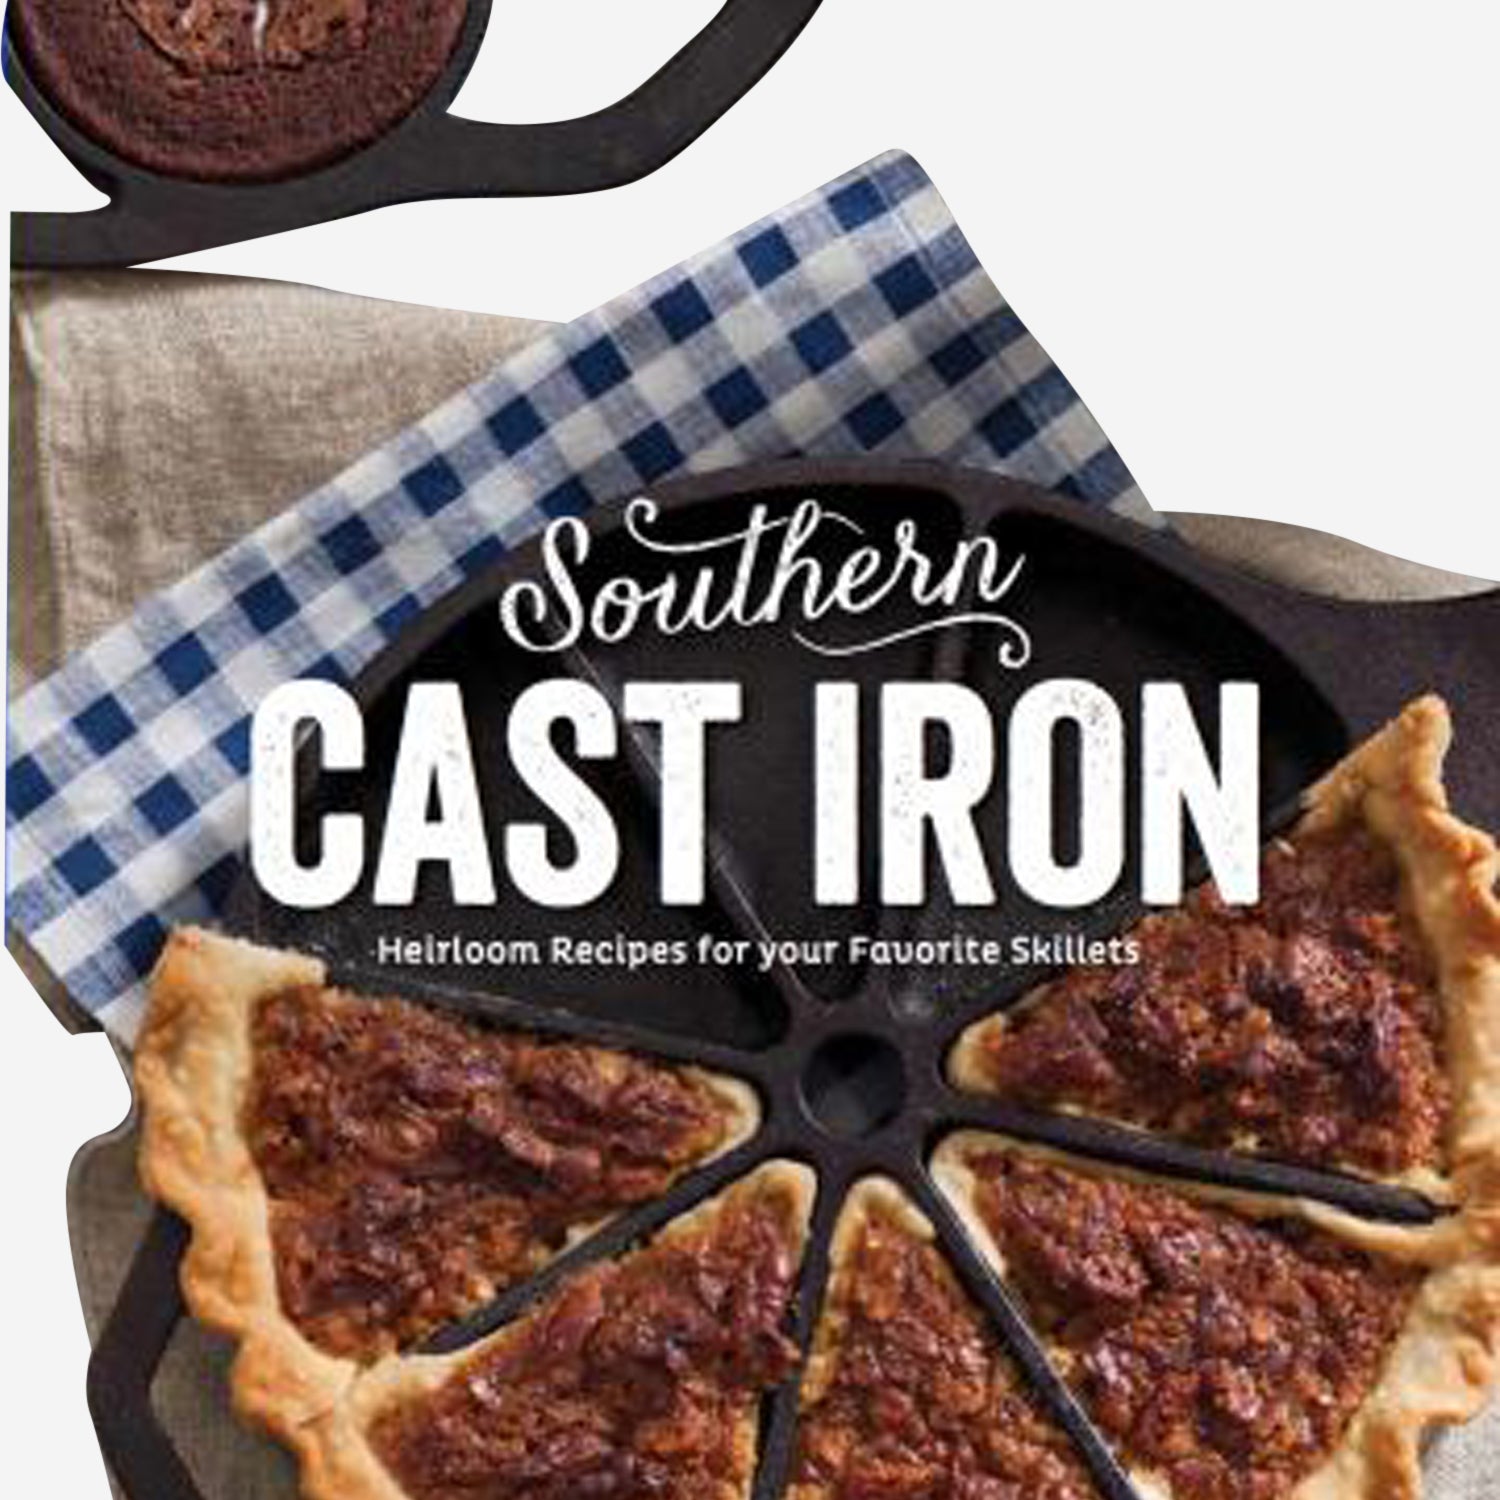 Southern Cast Iron: Heirloom Recipes for Your Favorites Skillets